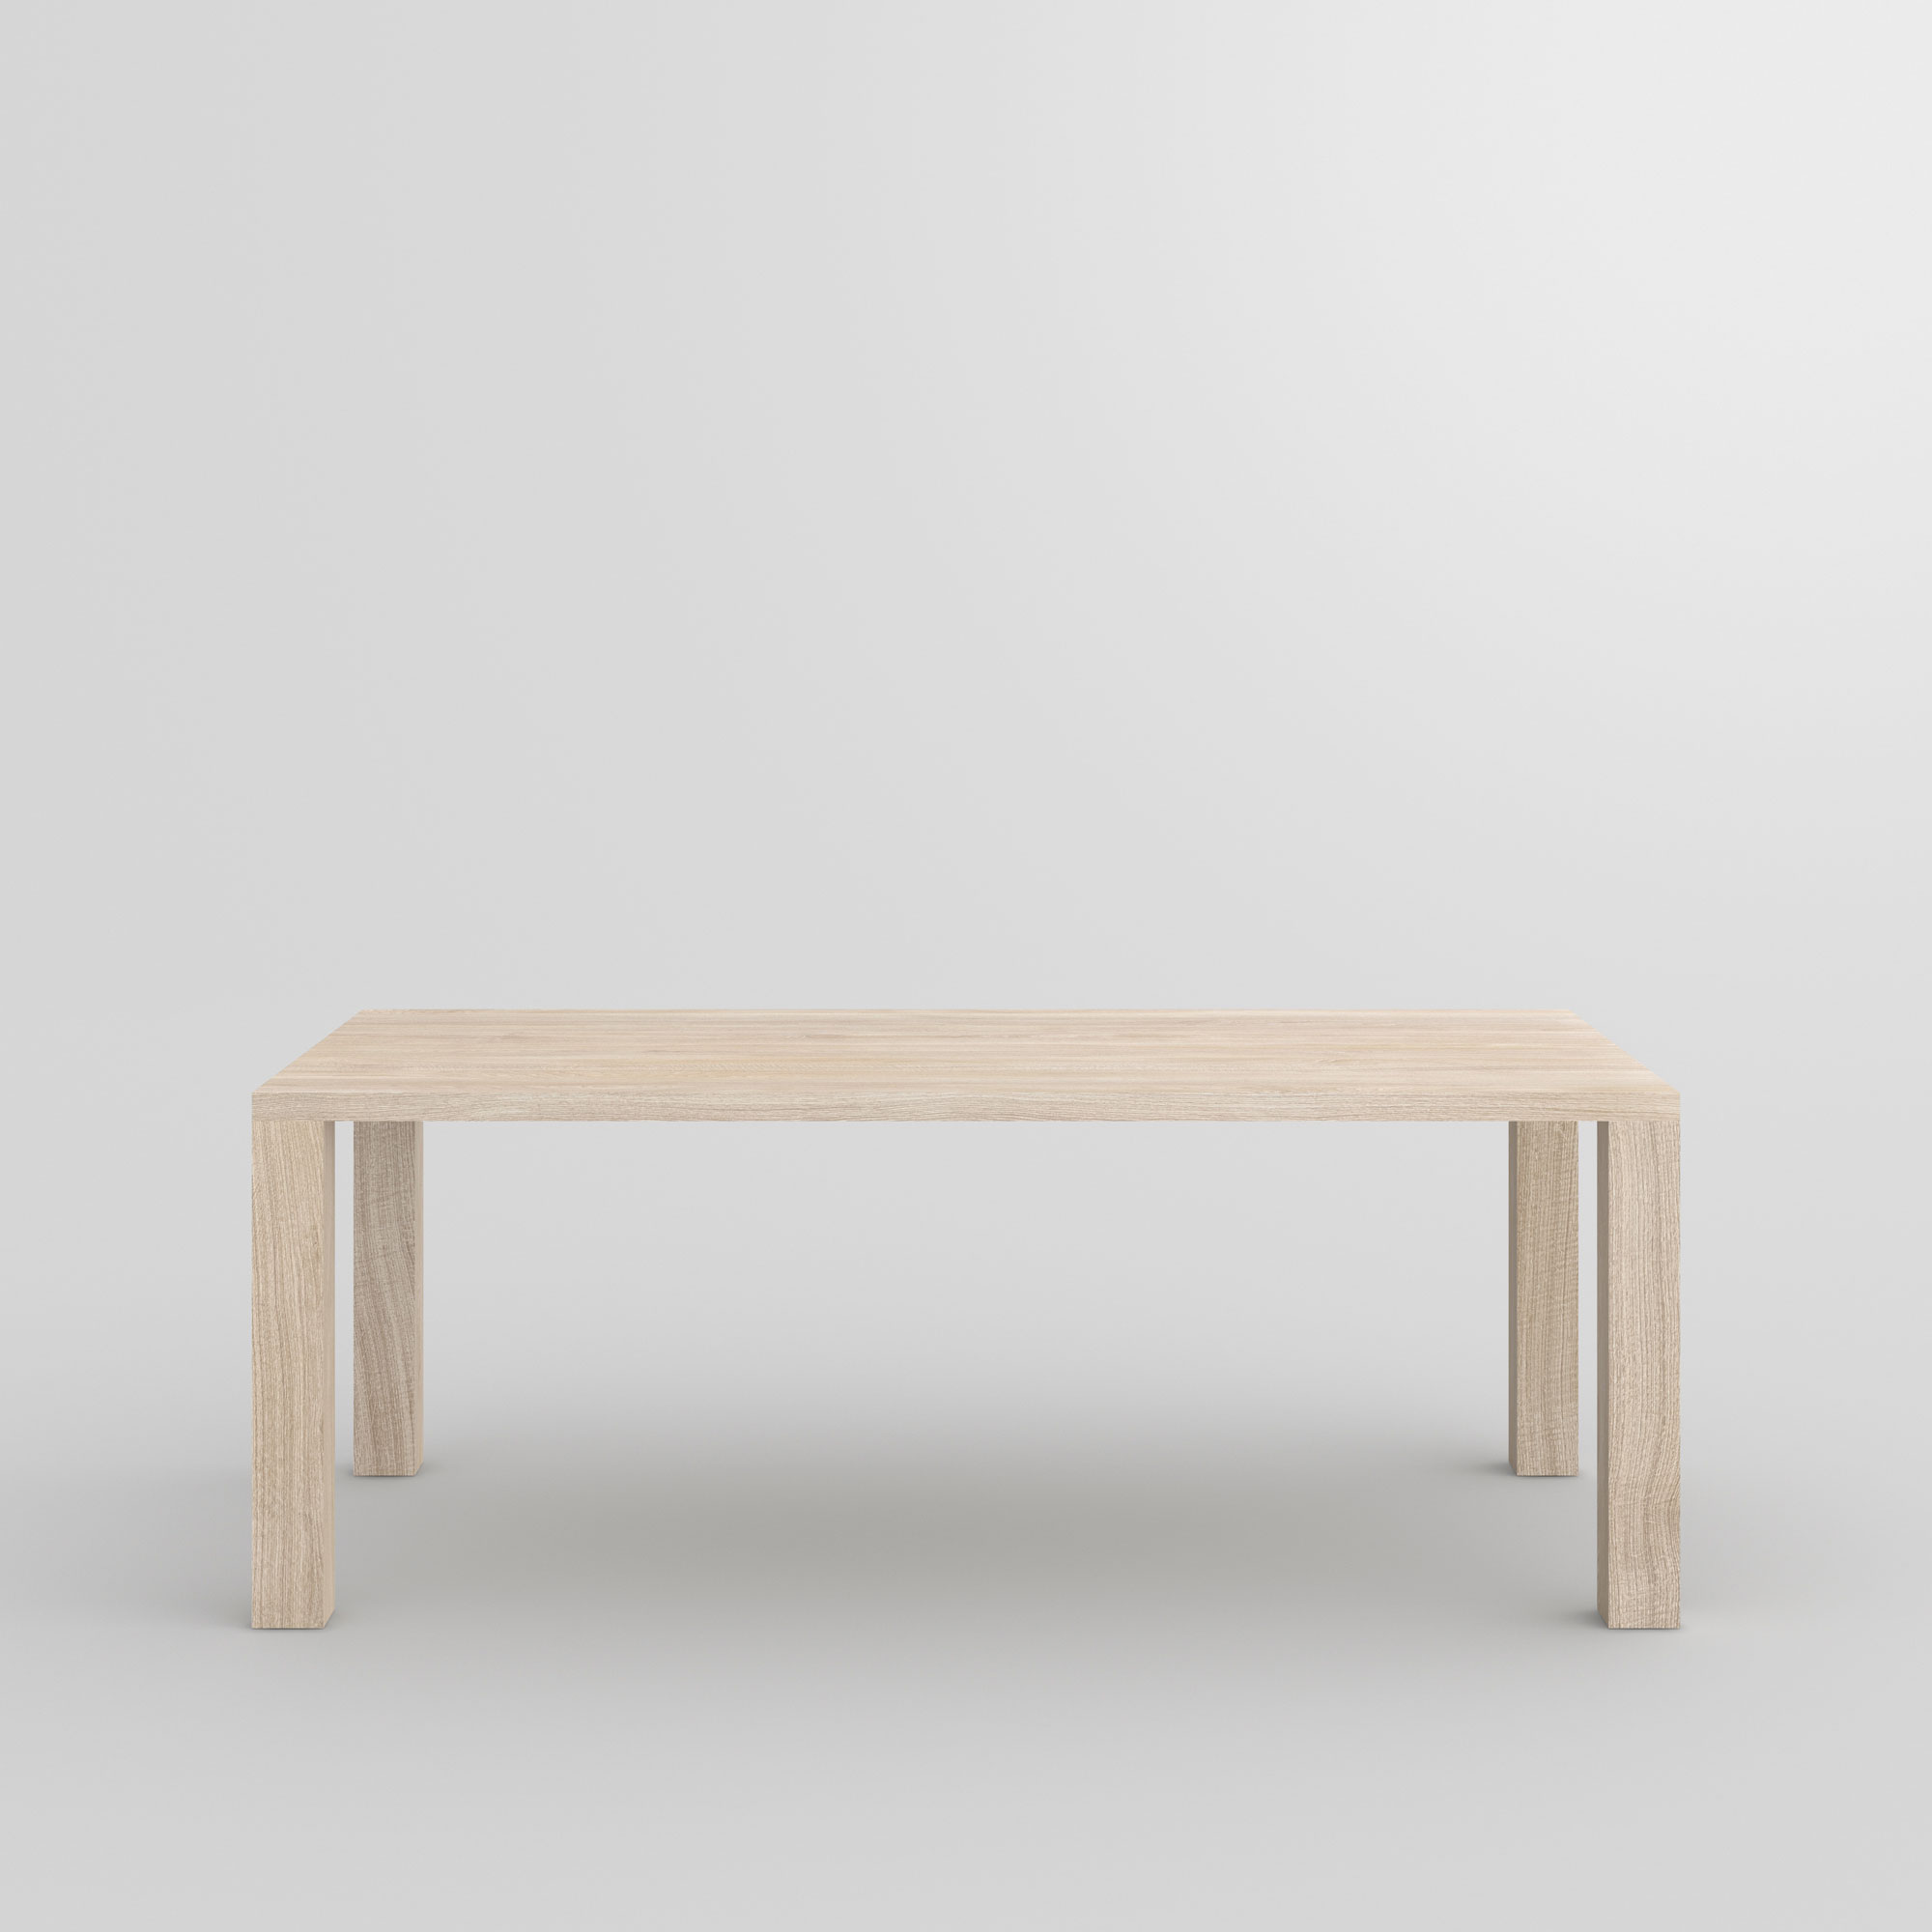 Frameless Solid Wood Table IUSTUS cam2 custom made in solid wood by vitamin design